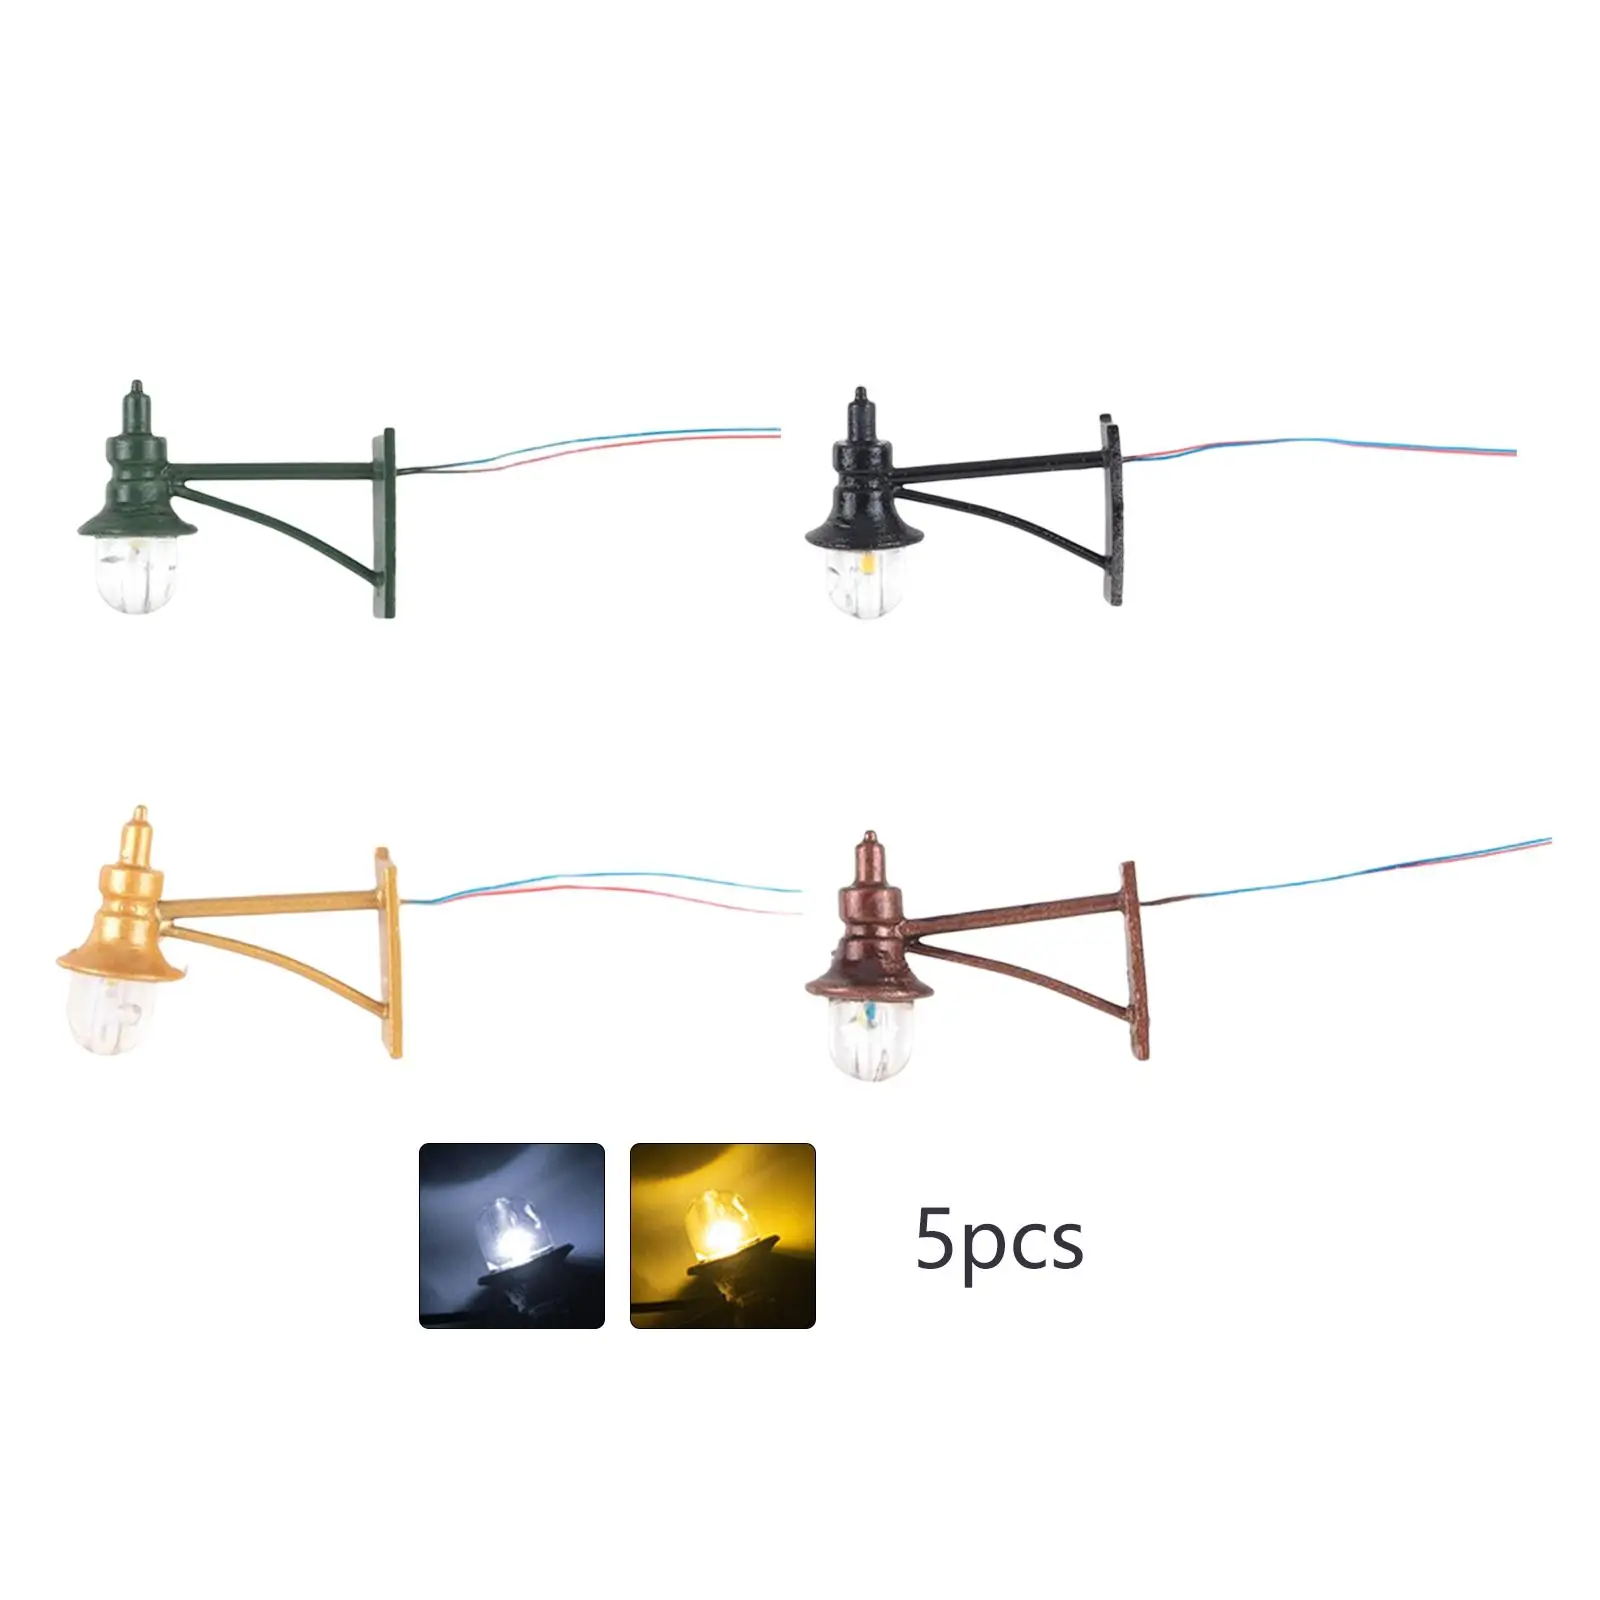 5x 1/87 Scale Street Lights Simulation Decor DIY Mini Lamp for Courtyard Building Sand Table Micro Landscape Accessories